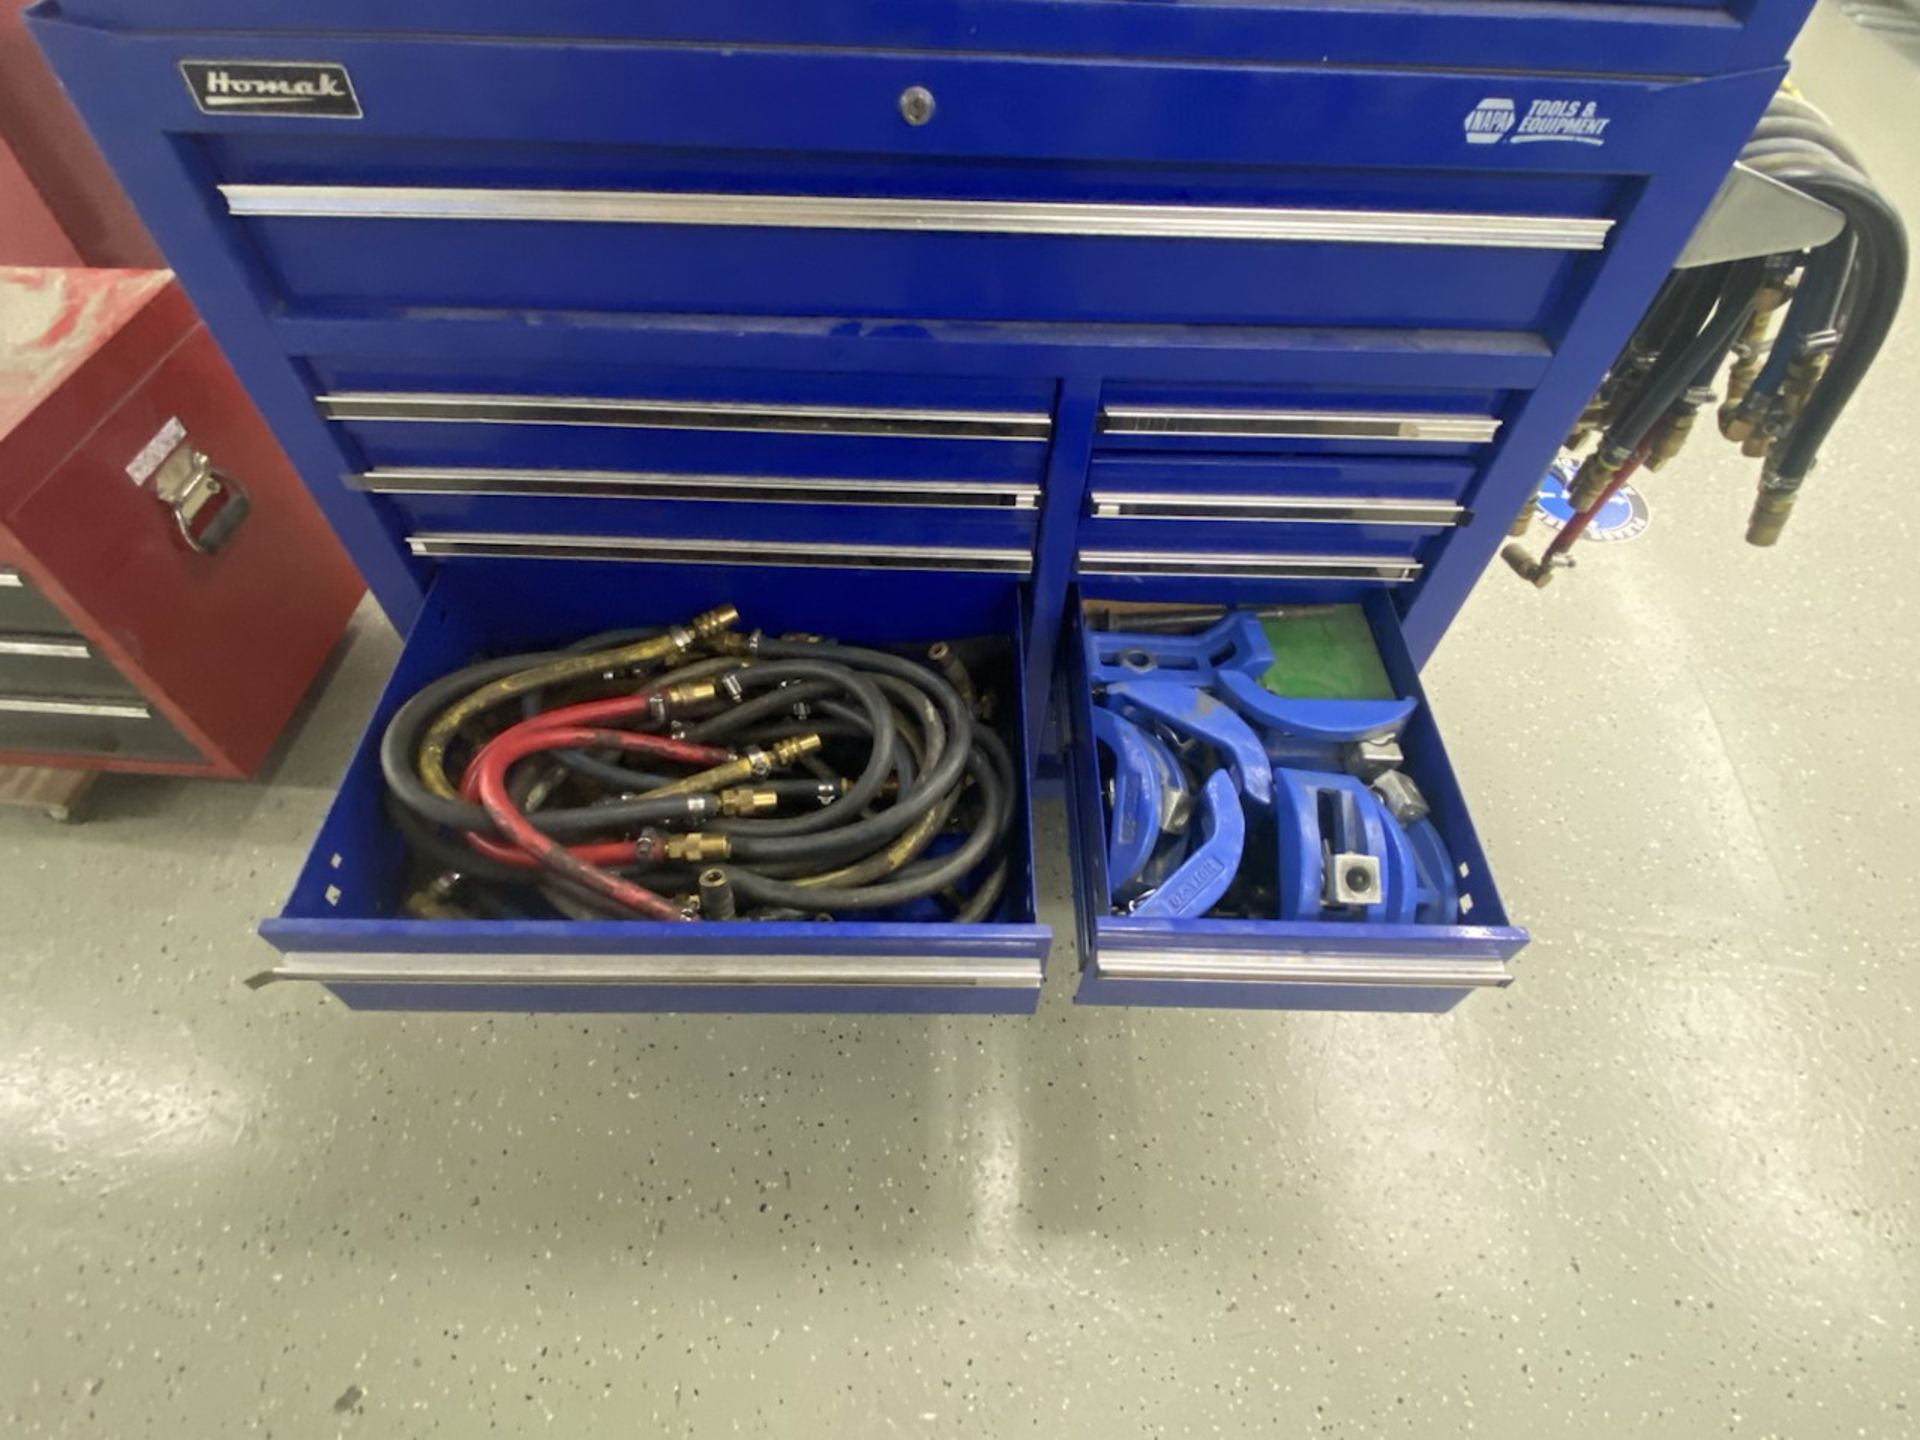 Homak 42"x 18" Tool Box & Contents Incl. Screwdrivers, Pliers, Eye Bolts, Air Hoses, Hose Fittings - Image 12 of 14